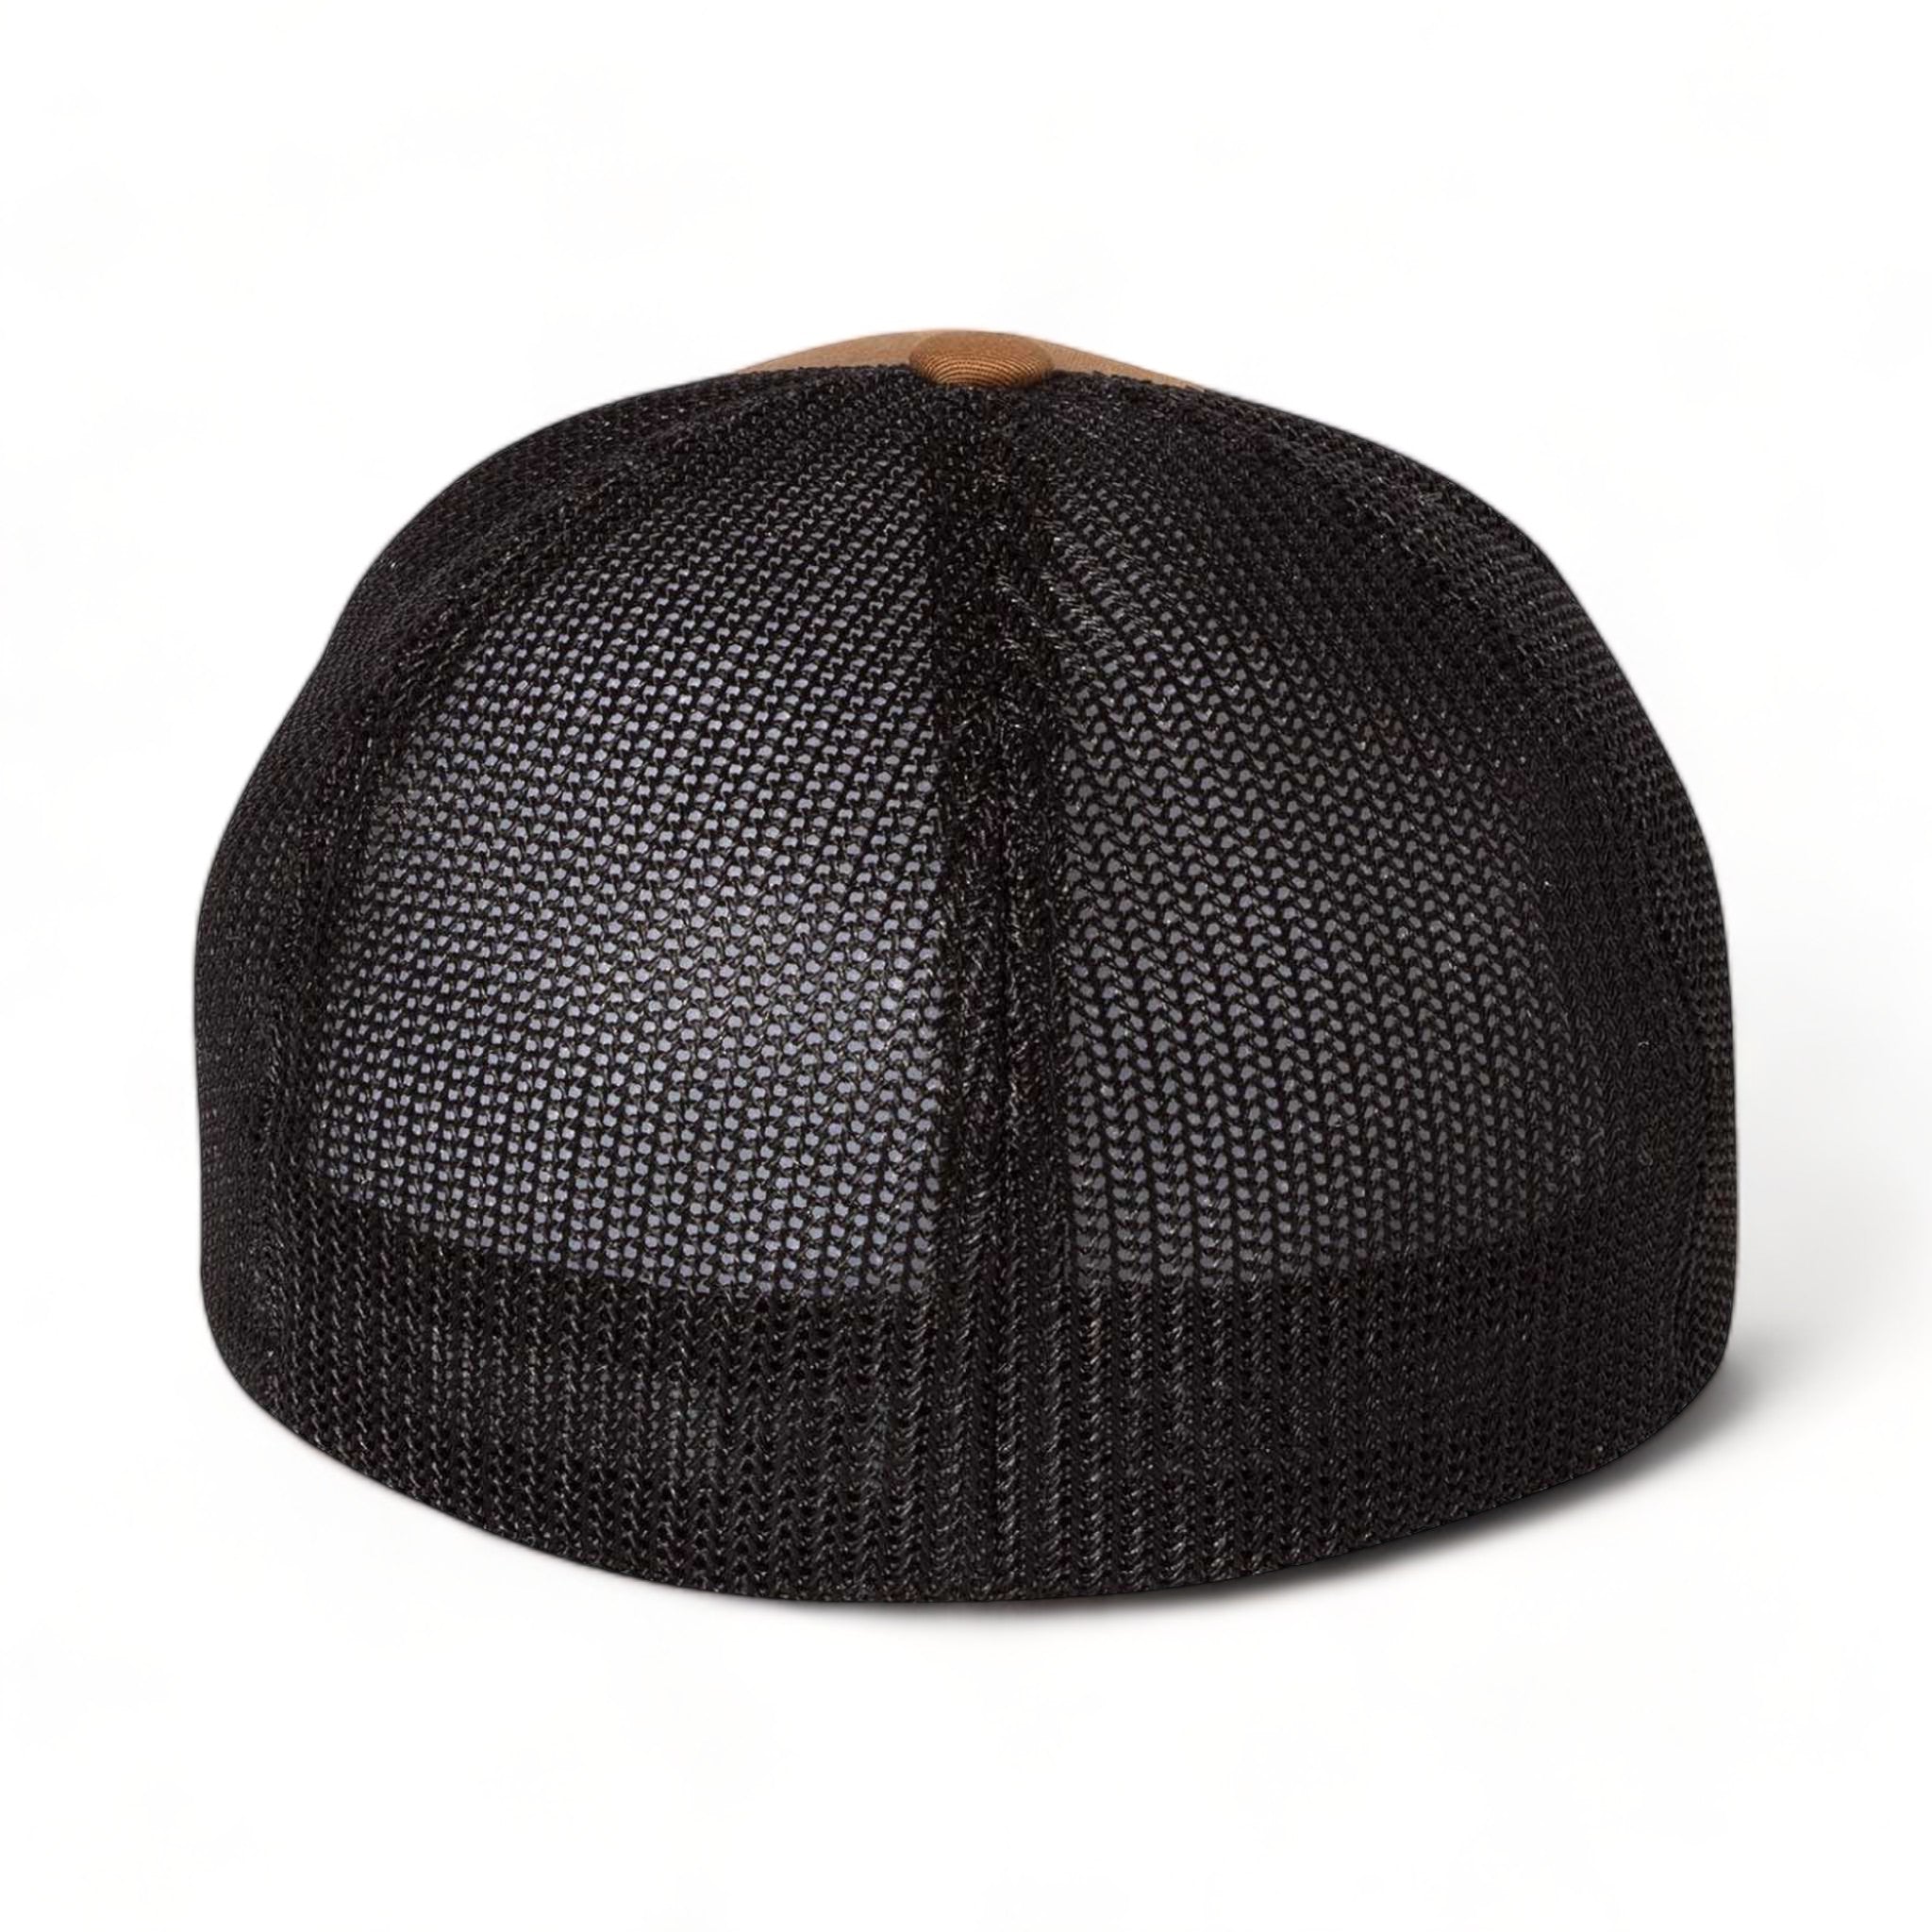 Back view of Flexfit 6511 custom hat in caramel and black